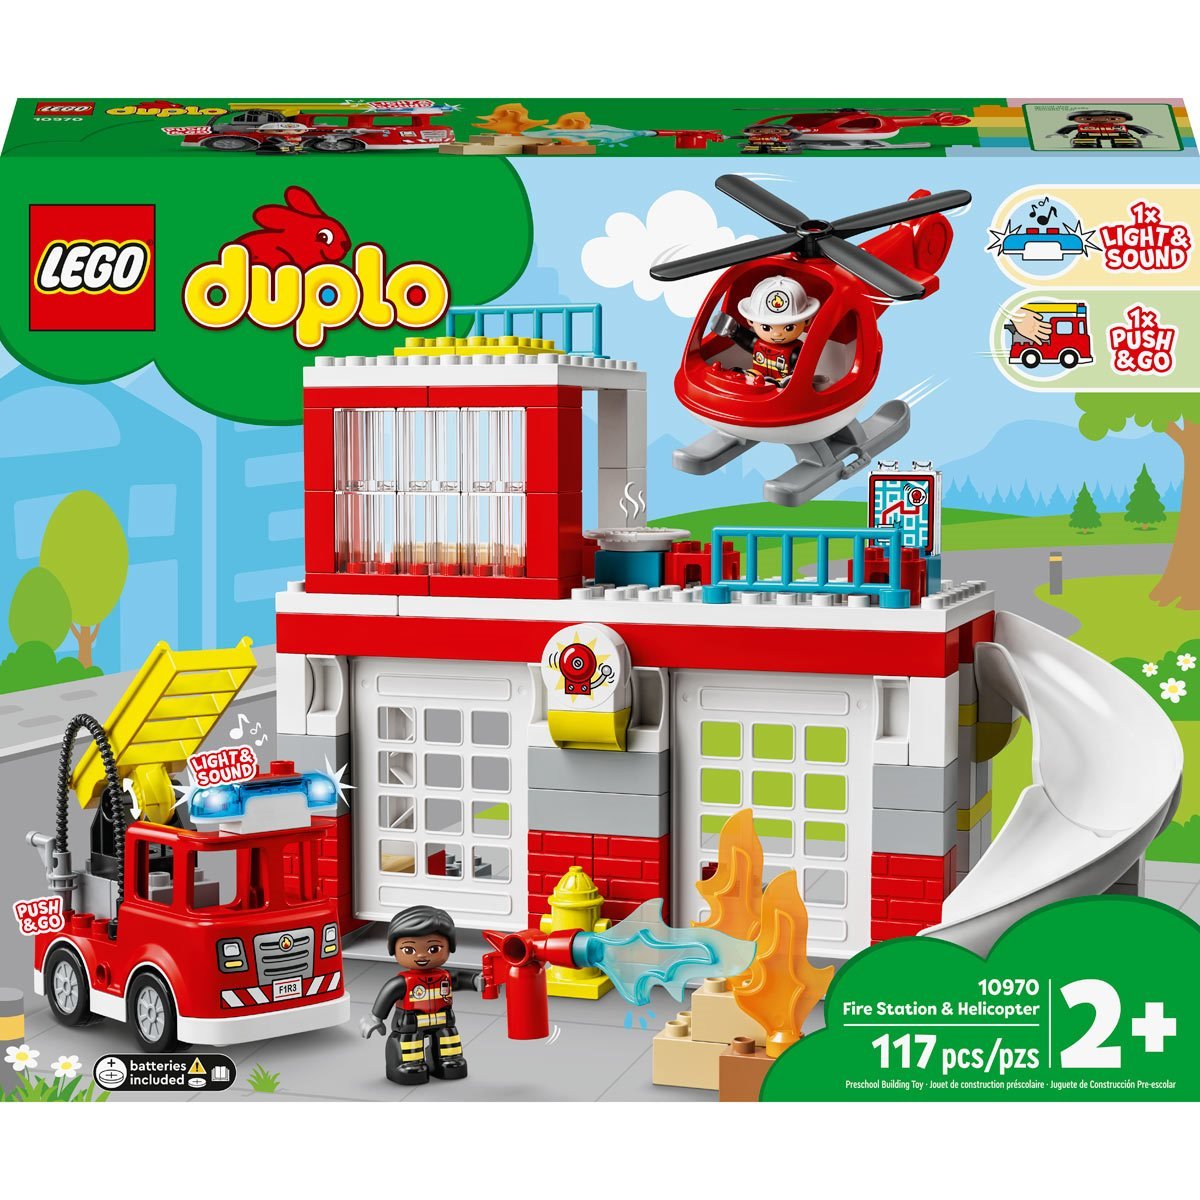 117 Pieces LEGO DUPLO Rescue Fire Station & Helicopter 10970 Building Toy; Playset with Fire Truck and Helicopter; for Ages 2+ 